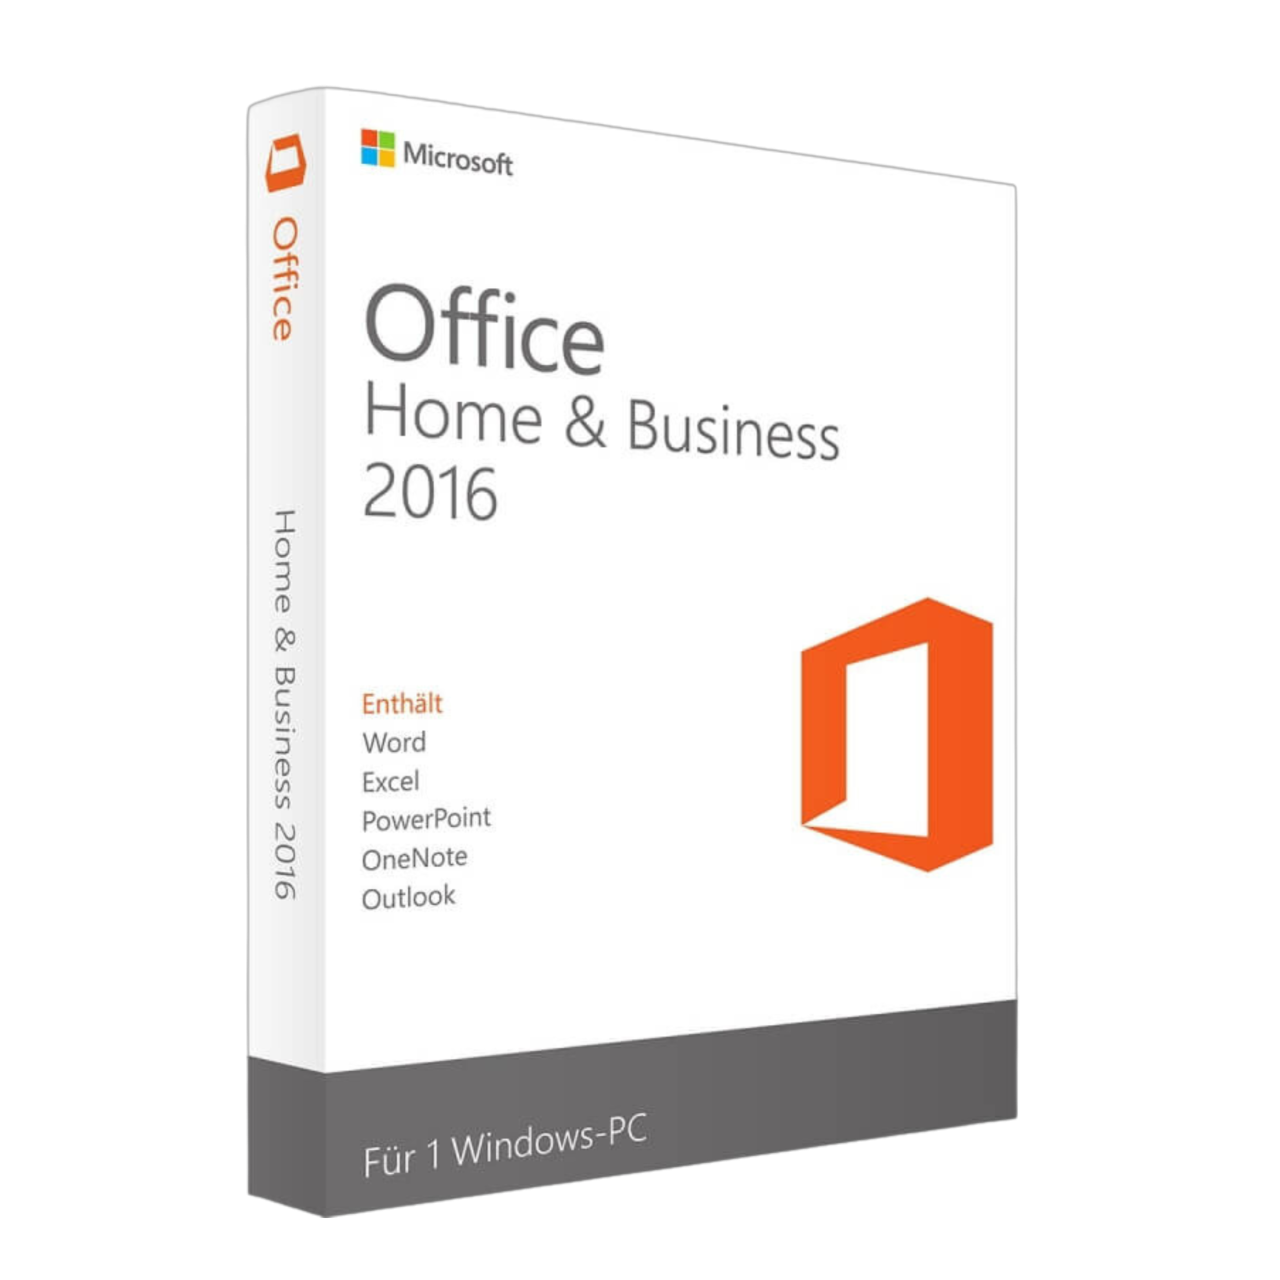 Office 2016 Home e Business